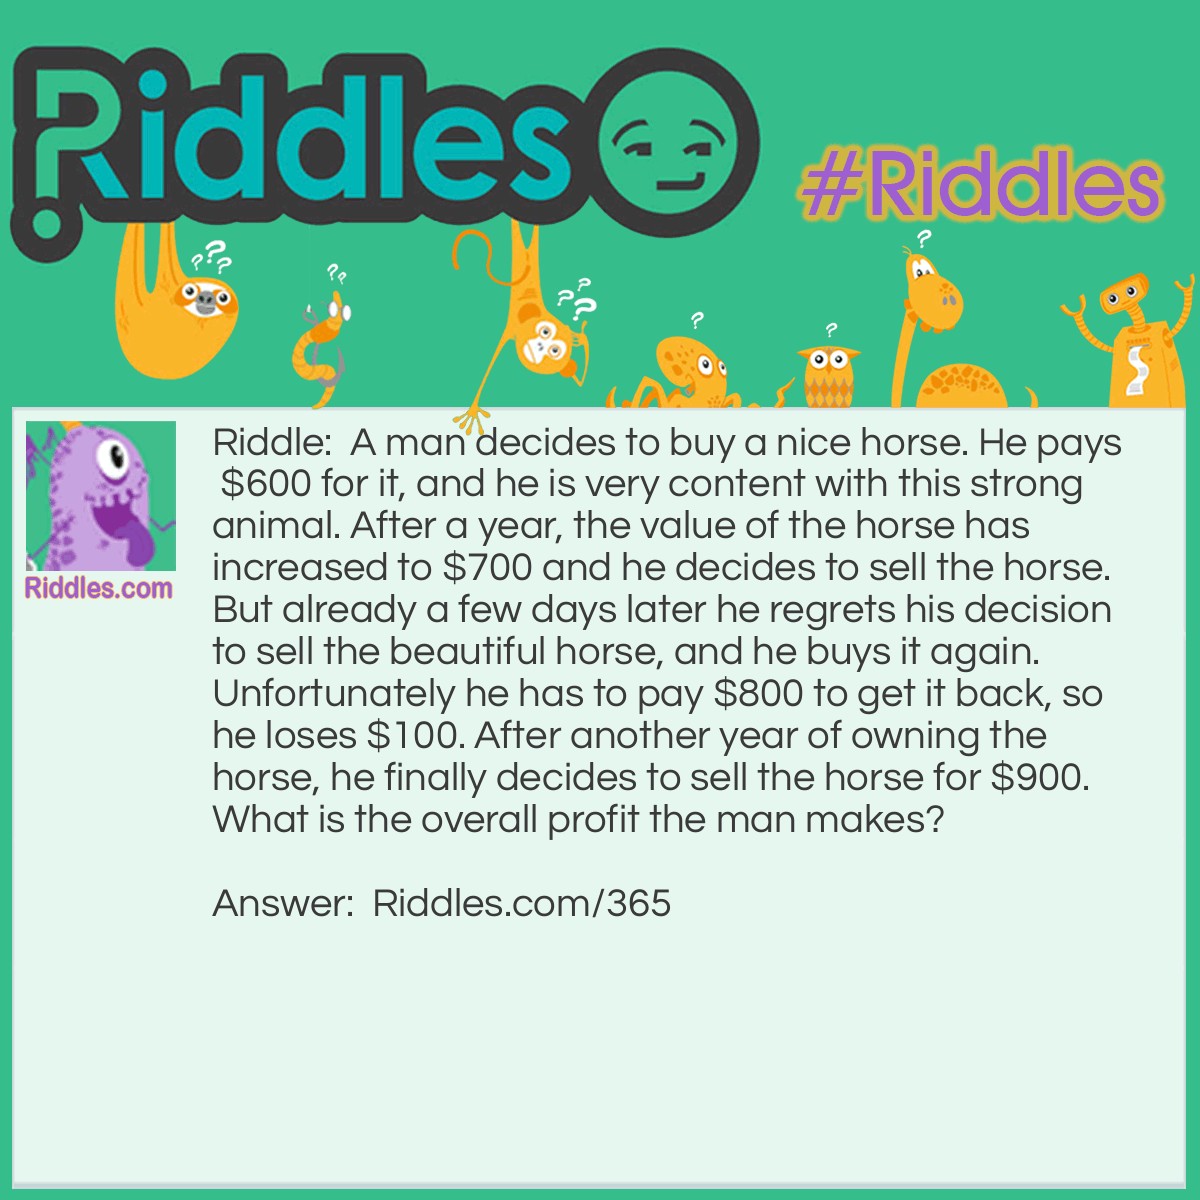 Riddle: A man decides to buy a nice horse. He pays $600 for it, and he is very content with this strong animal. After a year, the value of the horse has increased to $700 and he decides to sell the horse. But already a few days later he regrets his decision to sell the beautiful horse, and he buys it again. Unfortunately he has to pay $800 to get it back, so he loses $100. After another year of owning the horse, he finally decides to sell the horse for $900. What is the overall profit the man makes? Answer: The man makes an overall profit of $200.